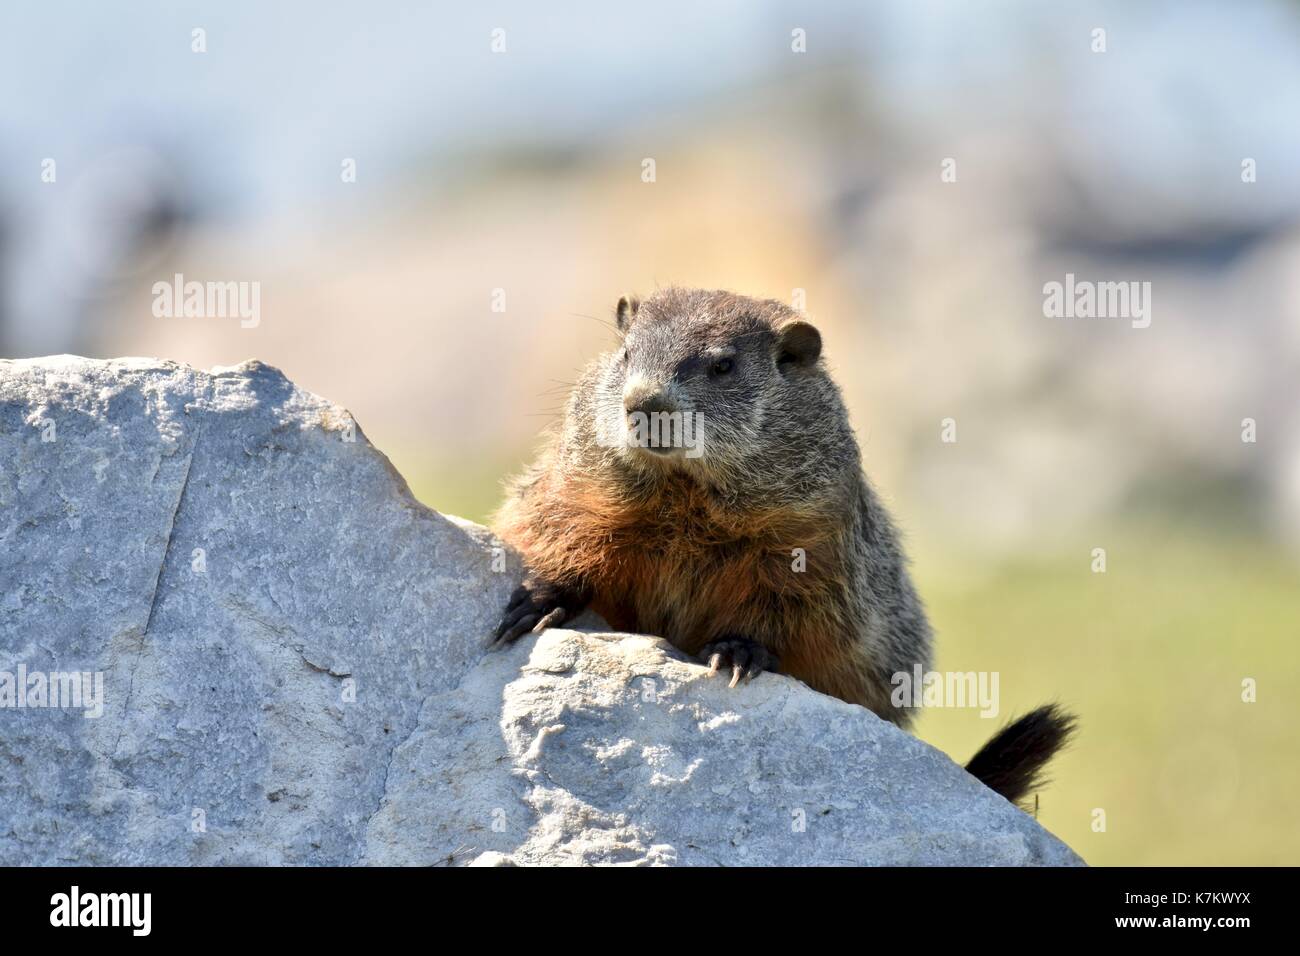 Groundhog (Marmota monax) sitting on a rock in the sun without his shadow Stock Photo